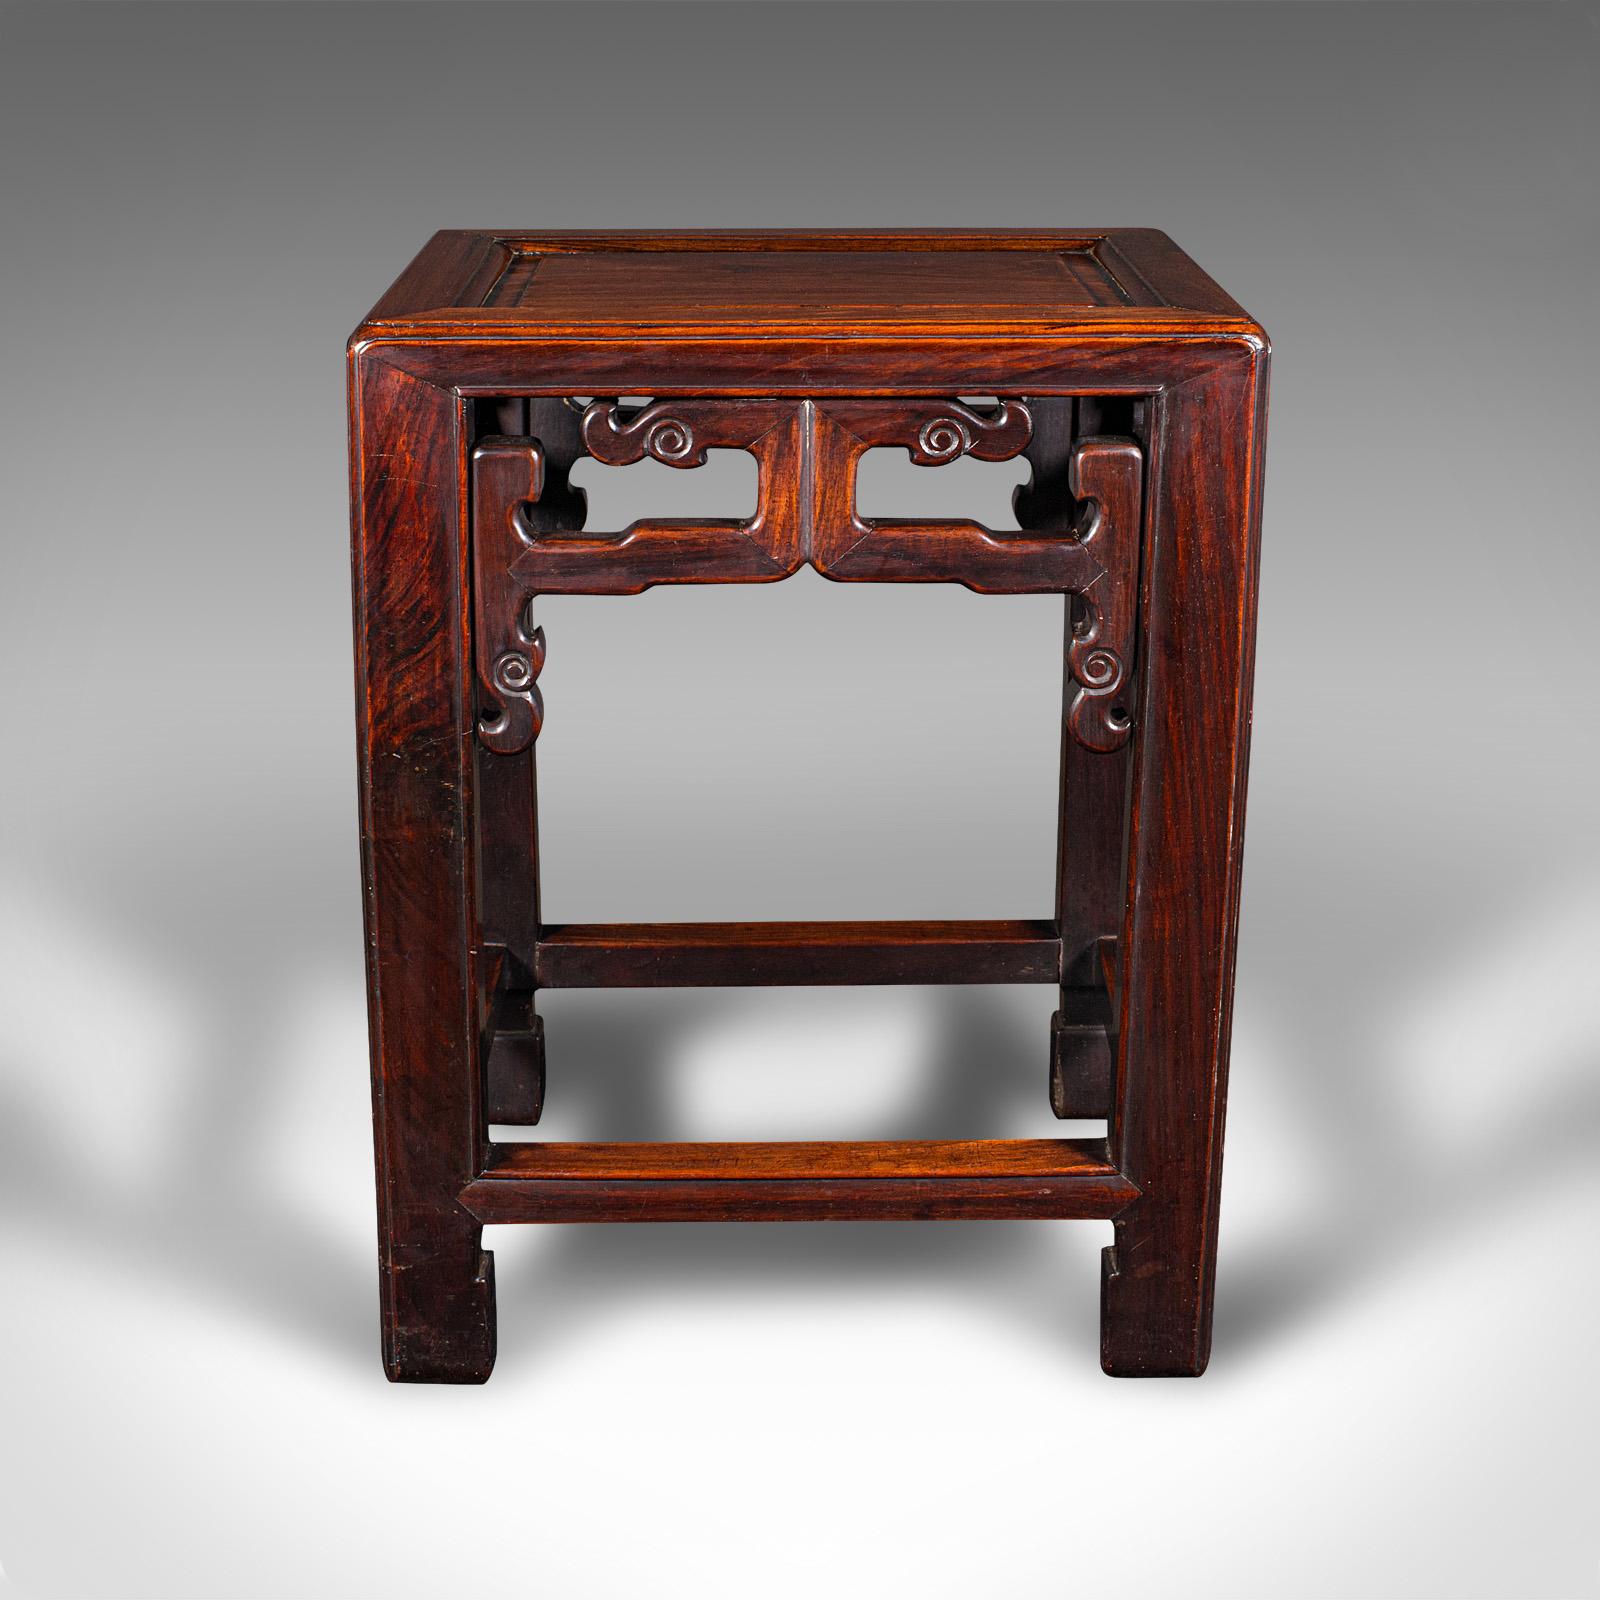 This is an antique occasional table. A Chinese, rosewood lamp table or jardiniere stand, dating to the late Victorian period, circa 1900.

Appealingly crafted small table with a substantial weight
Displays a desirable aged patina and in good